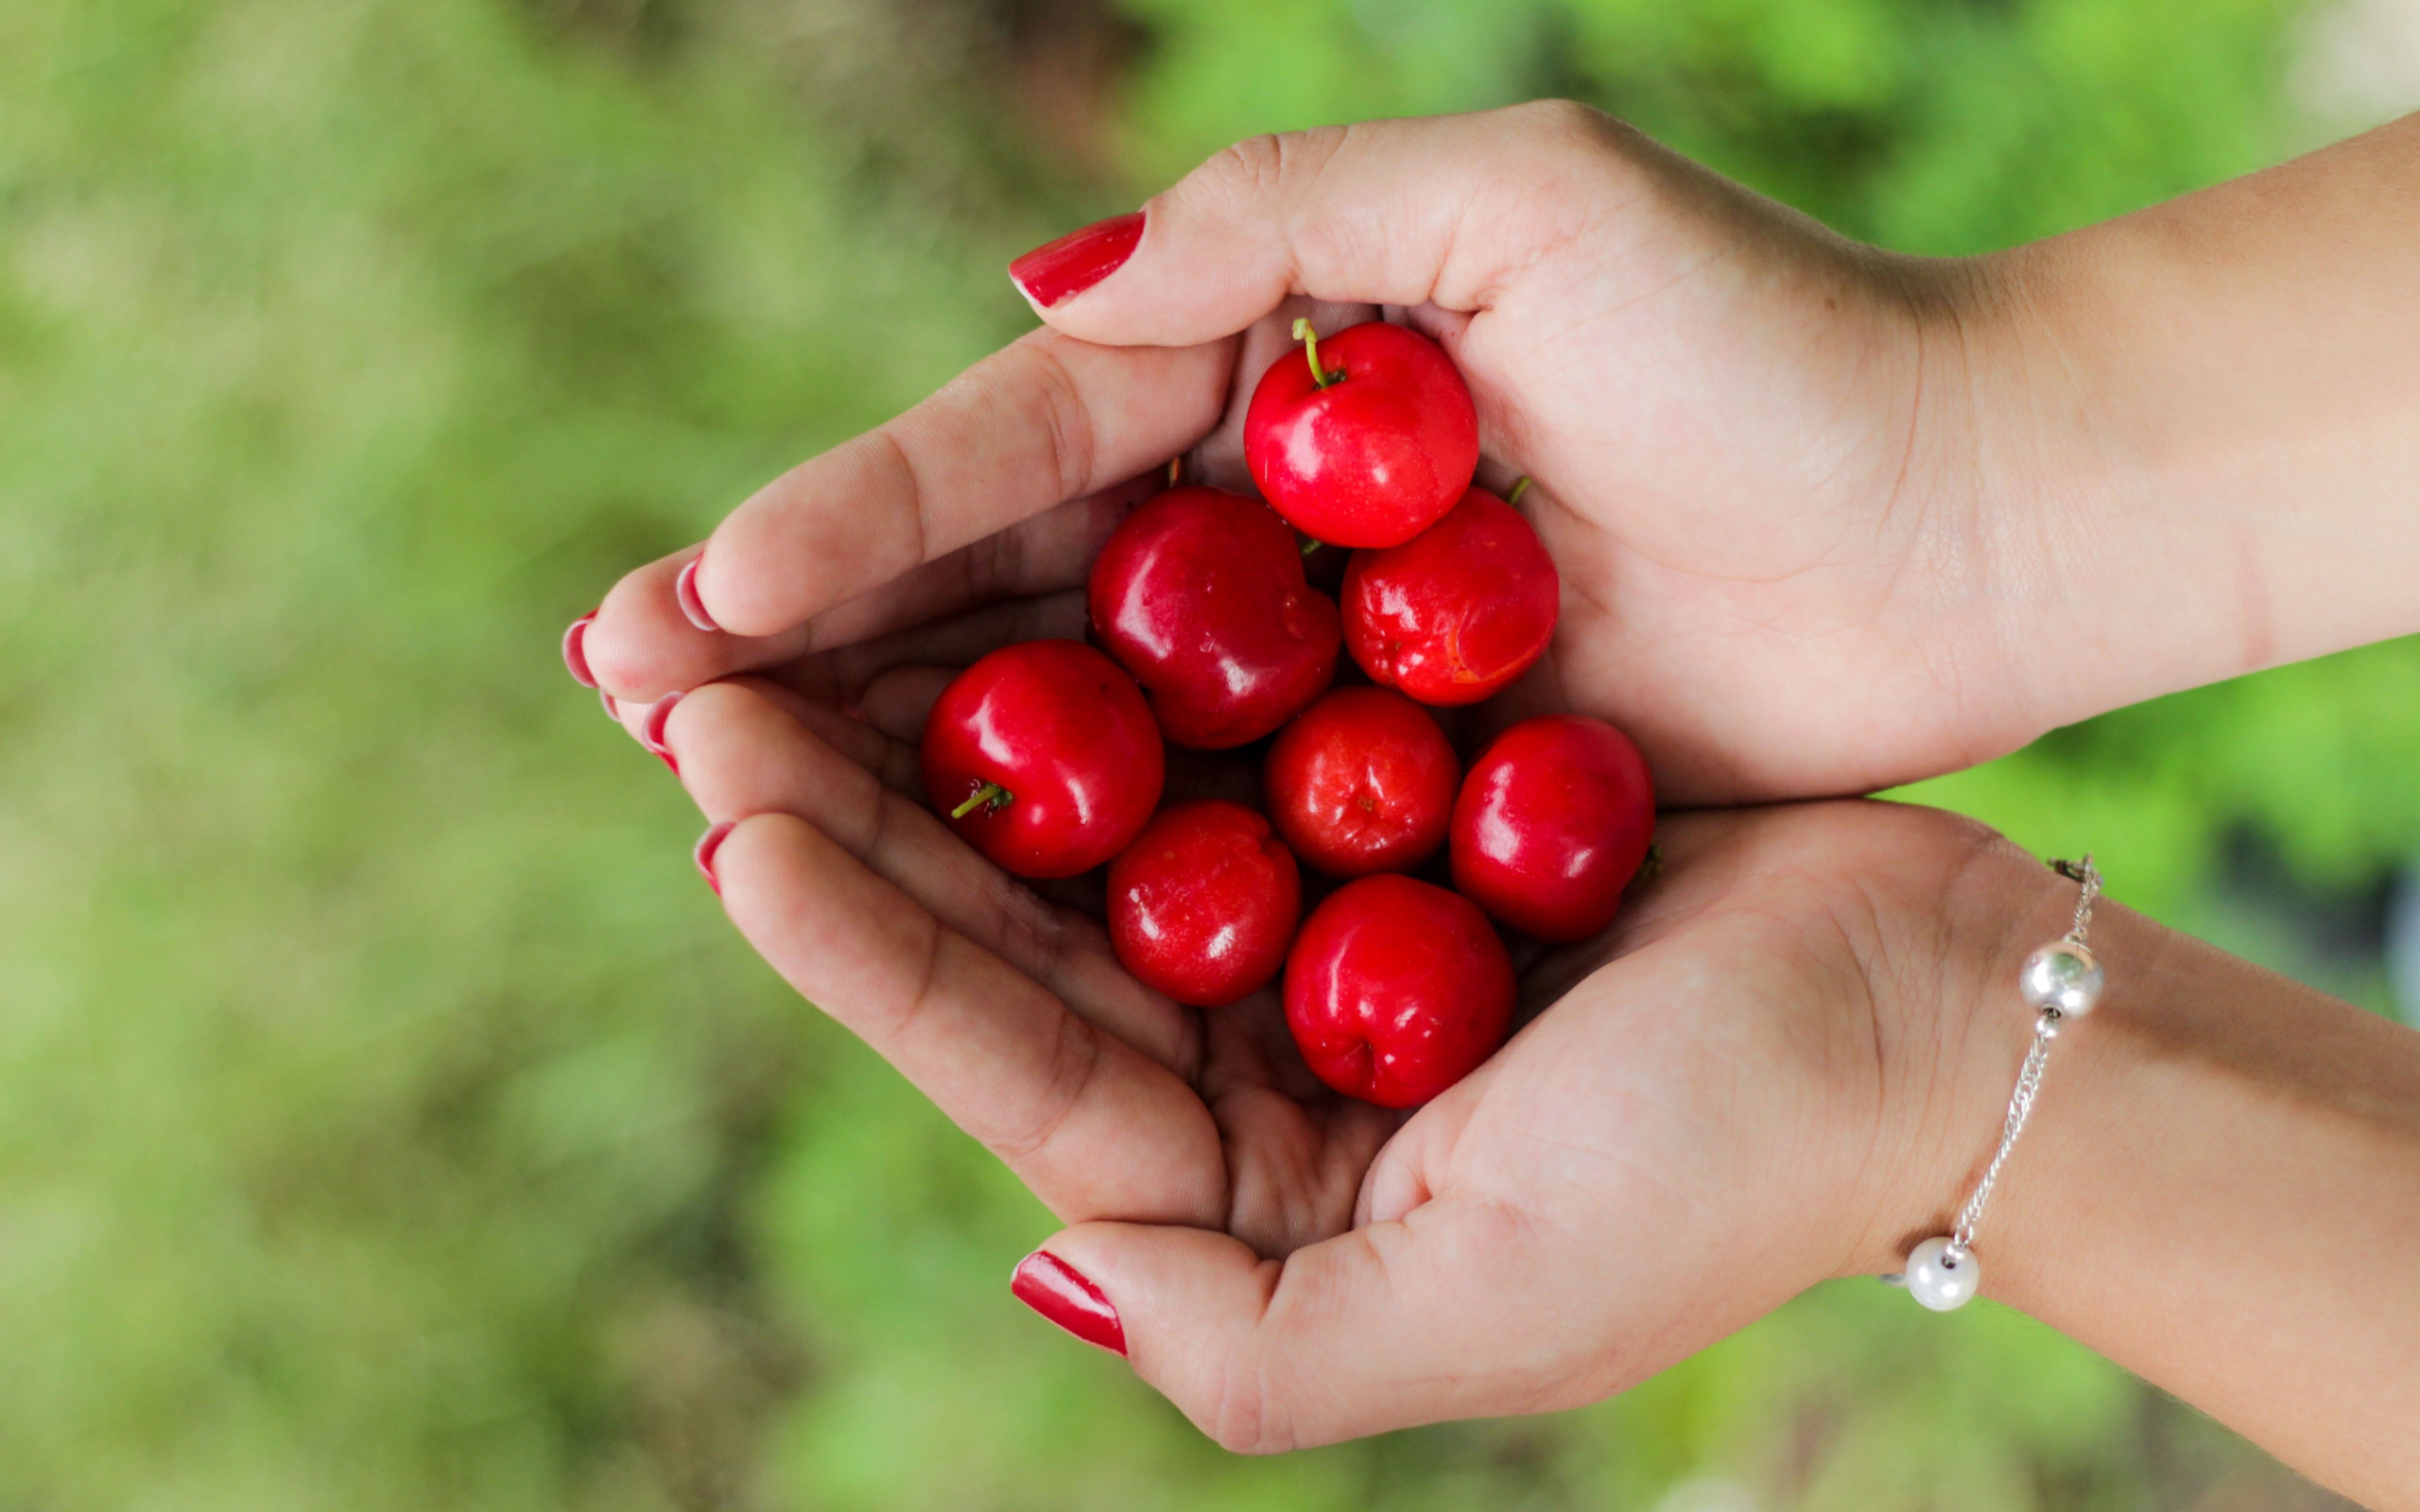 Hands filled with cherries wallpaper 2560x1600